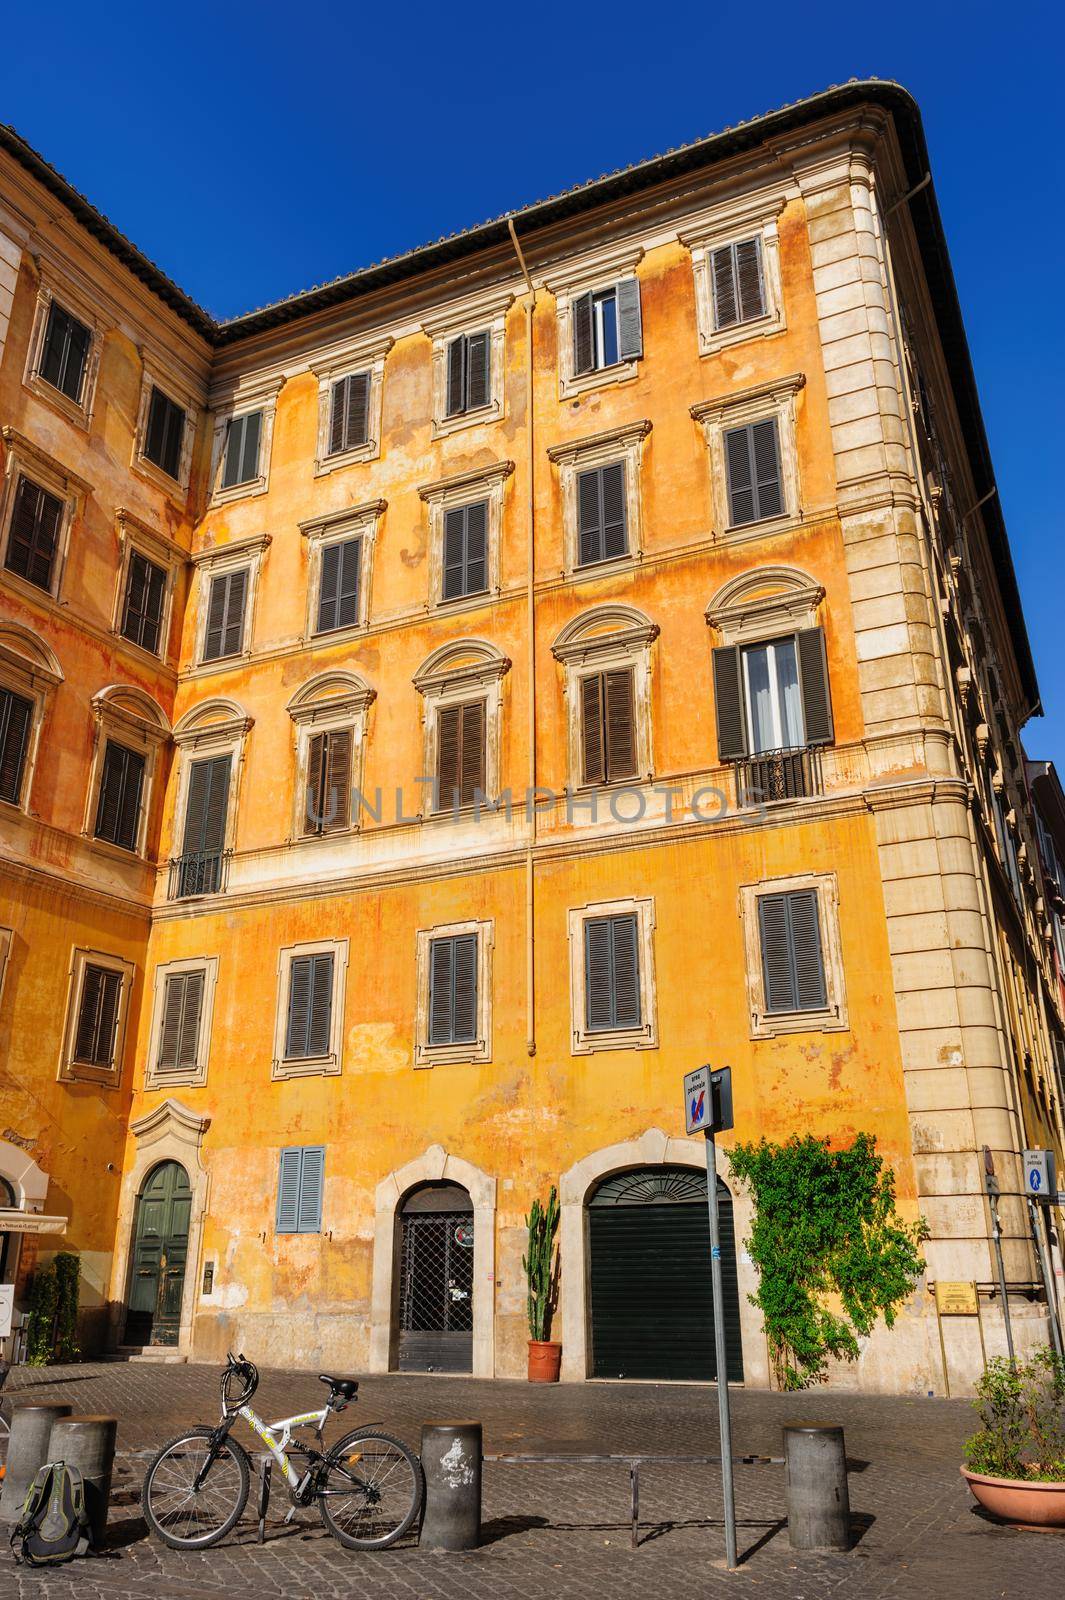 Rome, Italy, August 2014: Typical natural view of usual old residential buildings in Rome, Italy